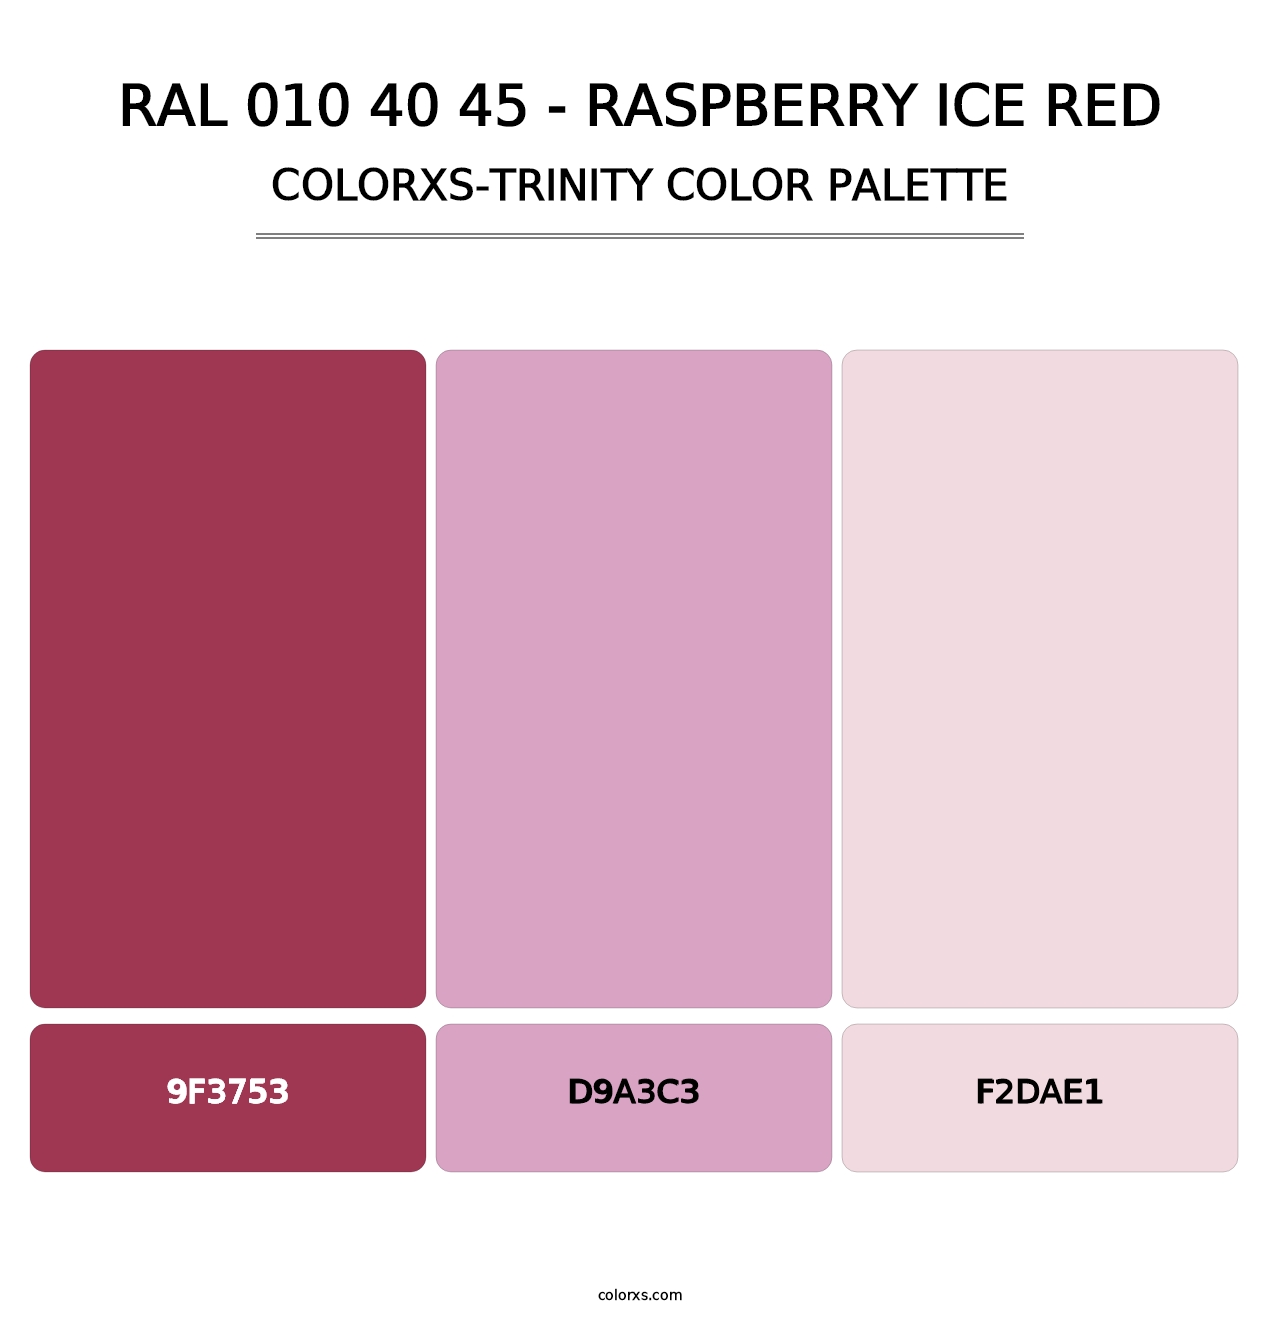 RAL 010 40 45 - Raspberry Ice Red - Colorxs Trinity Palette